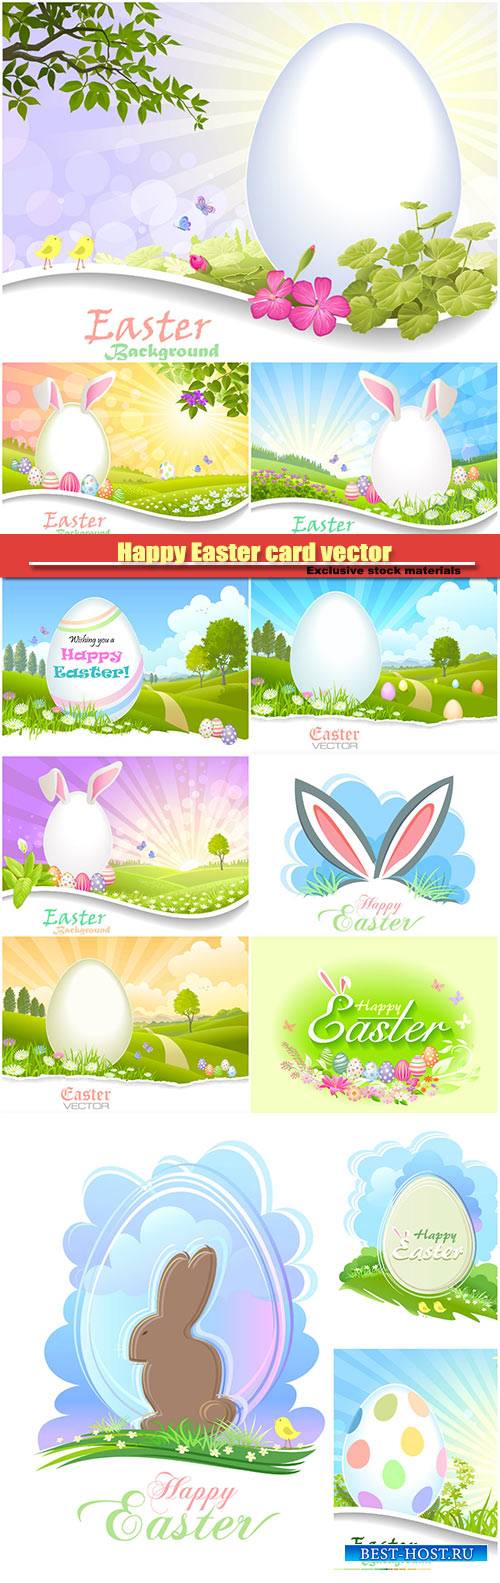 Happy Easter card vector background